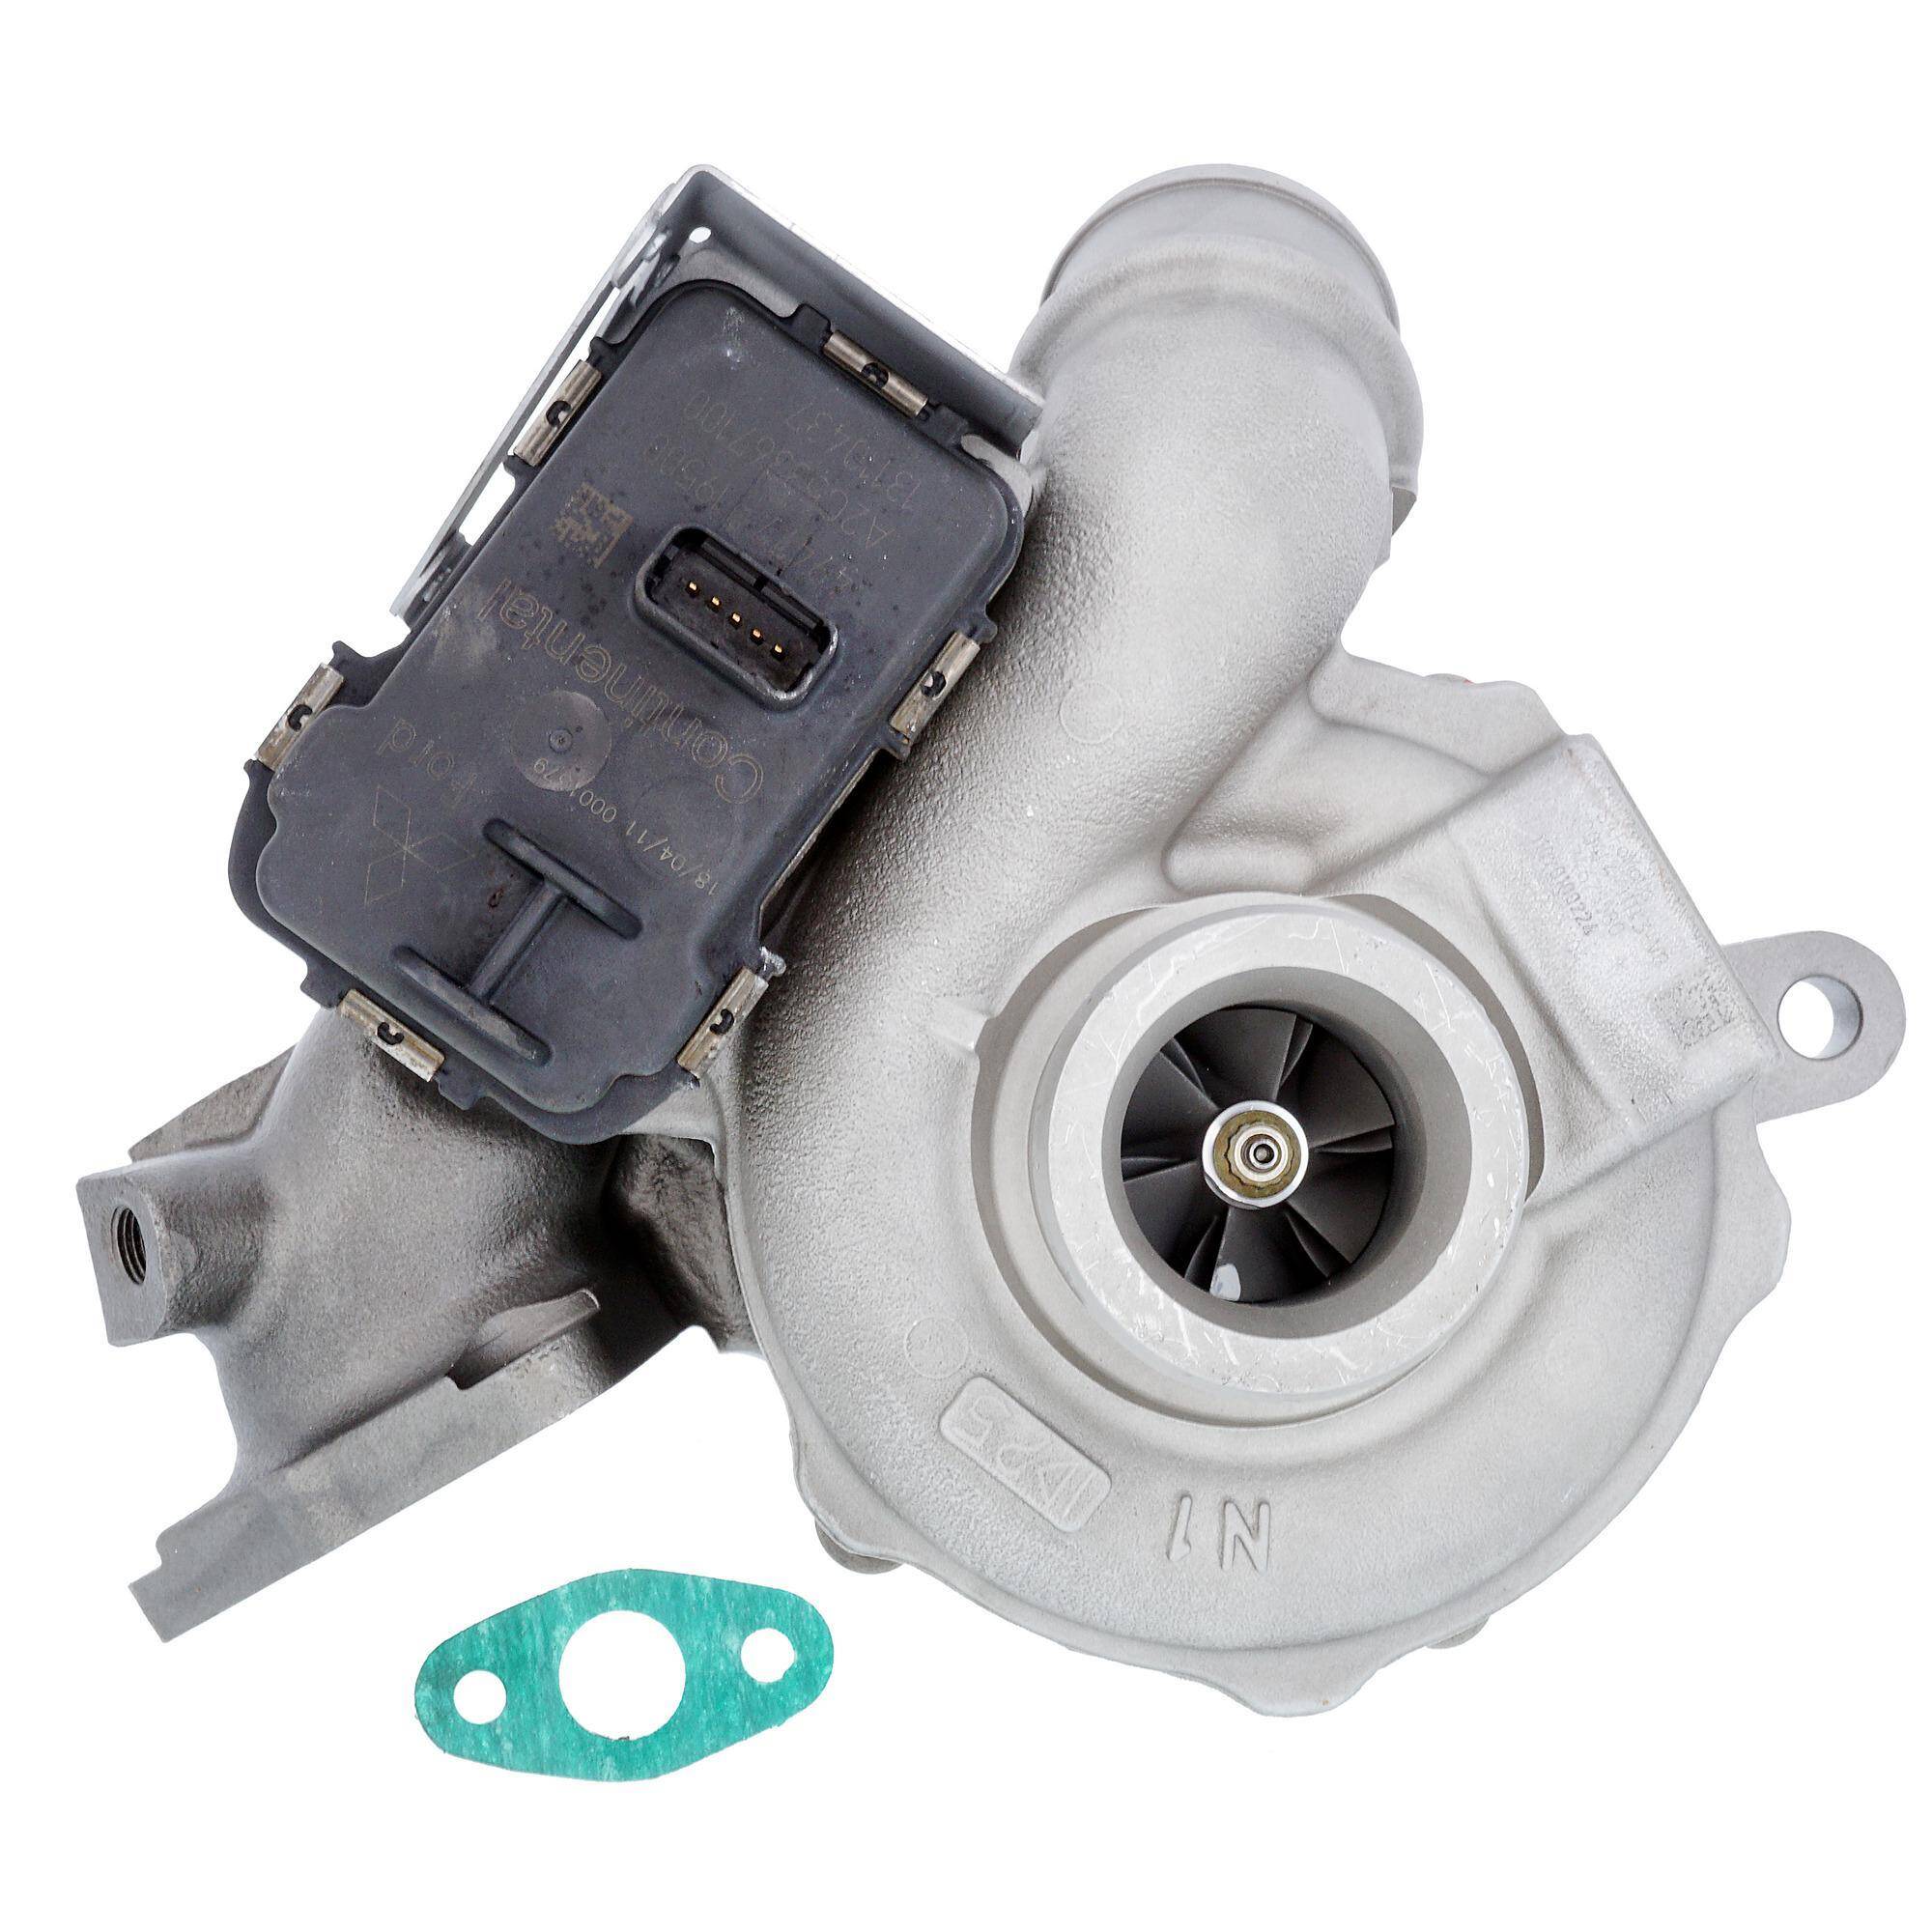 TURBOCHARGER TURBO REMANUFACTURED 49477-01104 9674675580 49477-01104